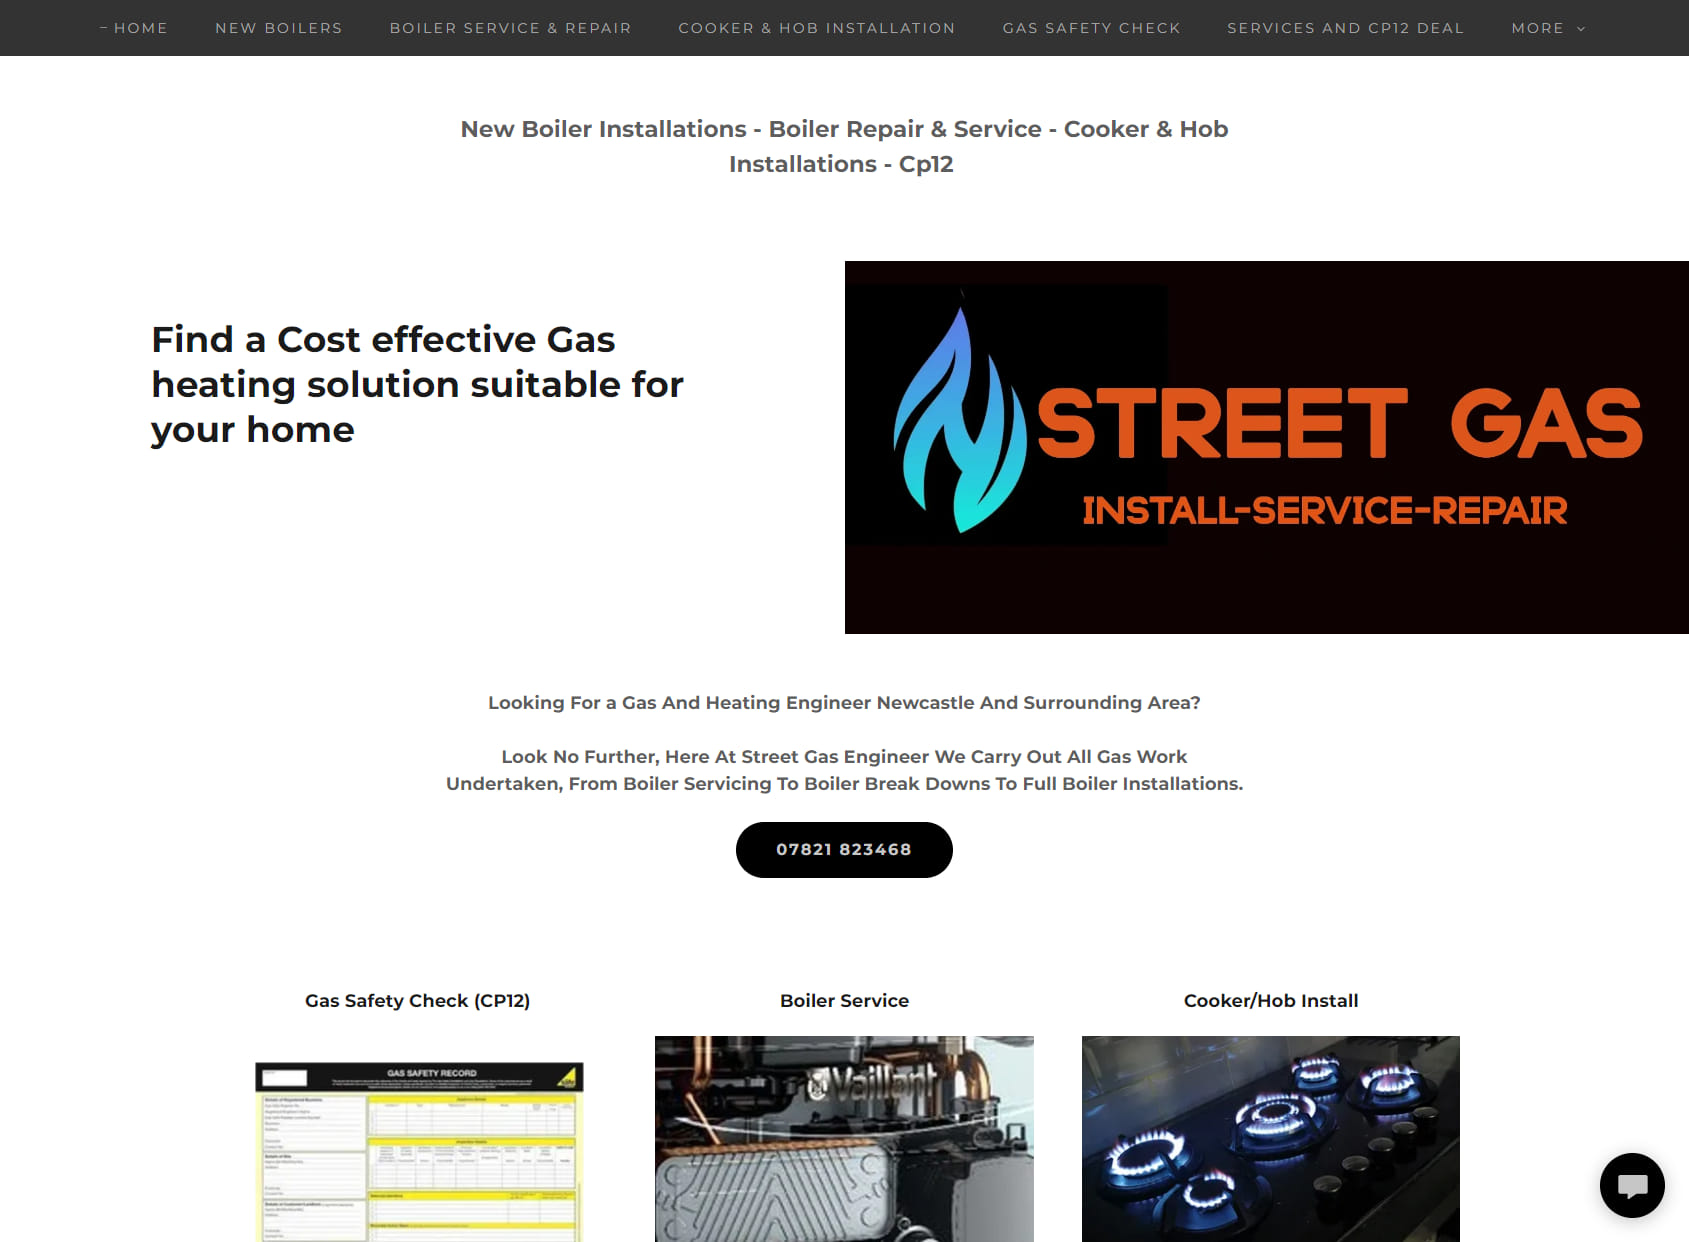 Street Gas - New Boiler Installation, Services & Repair, Cooker, Range, Hob, Thermostat install, Gas safety check Cp12.